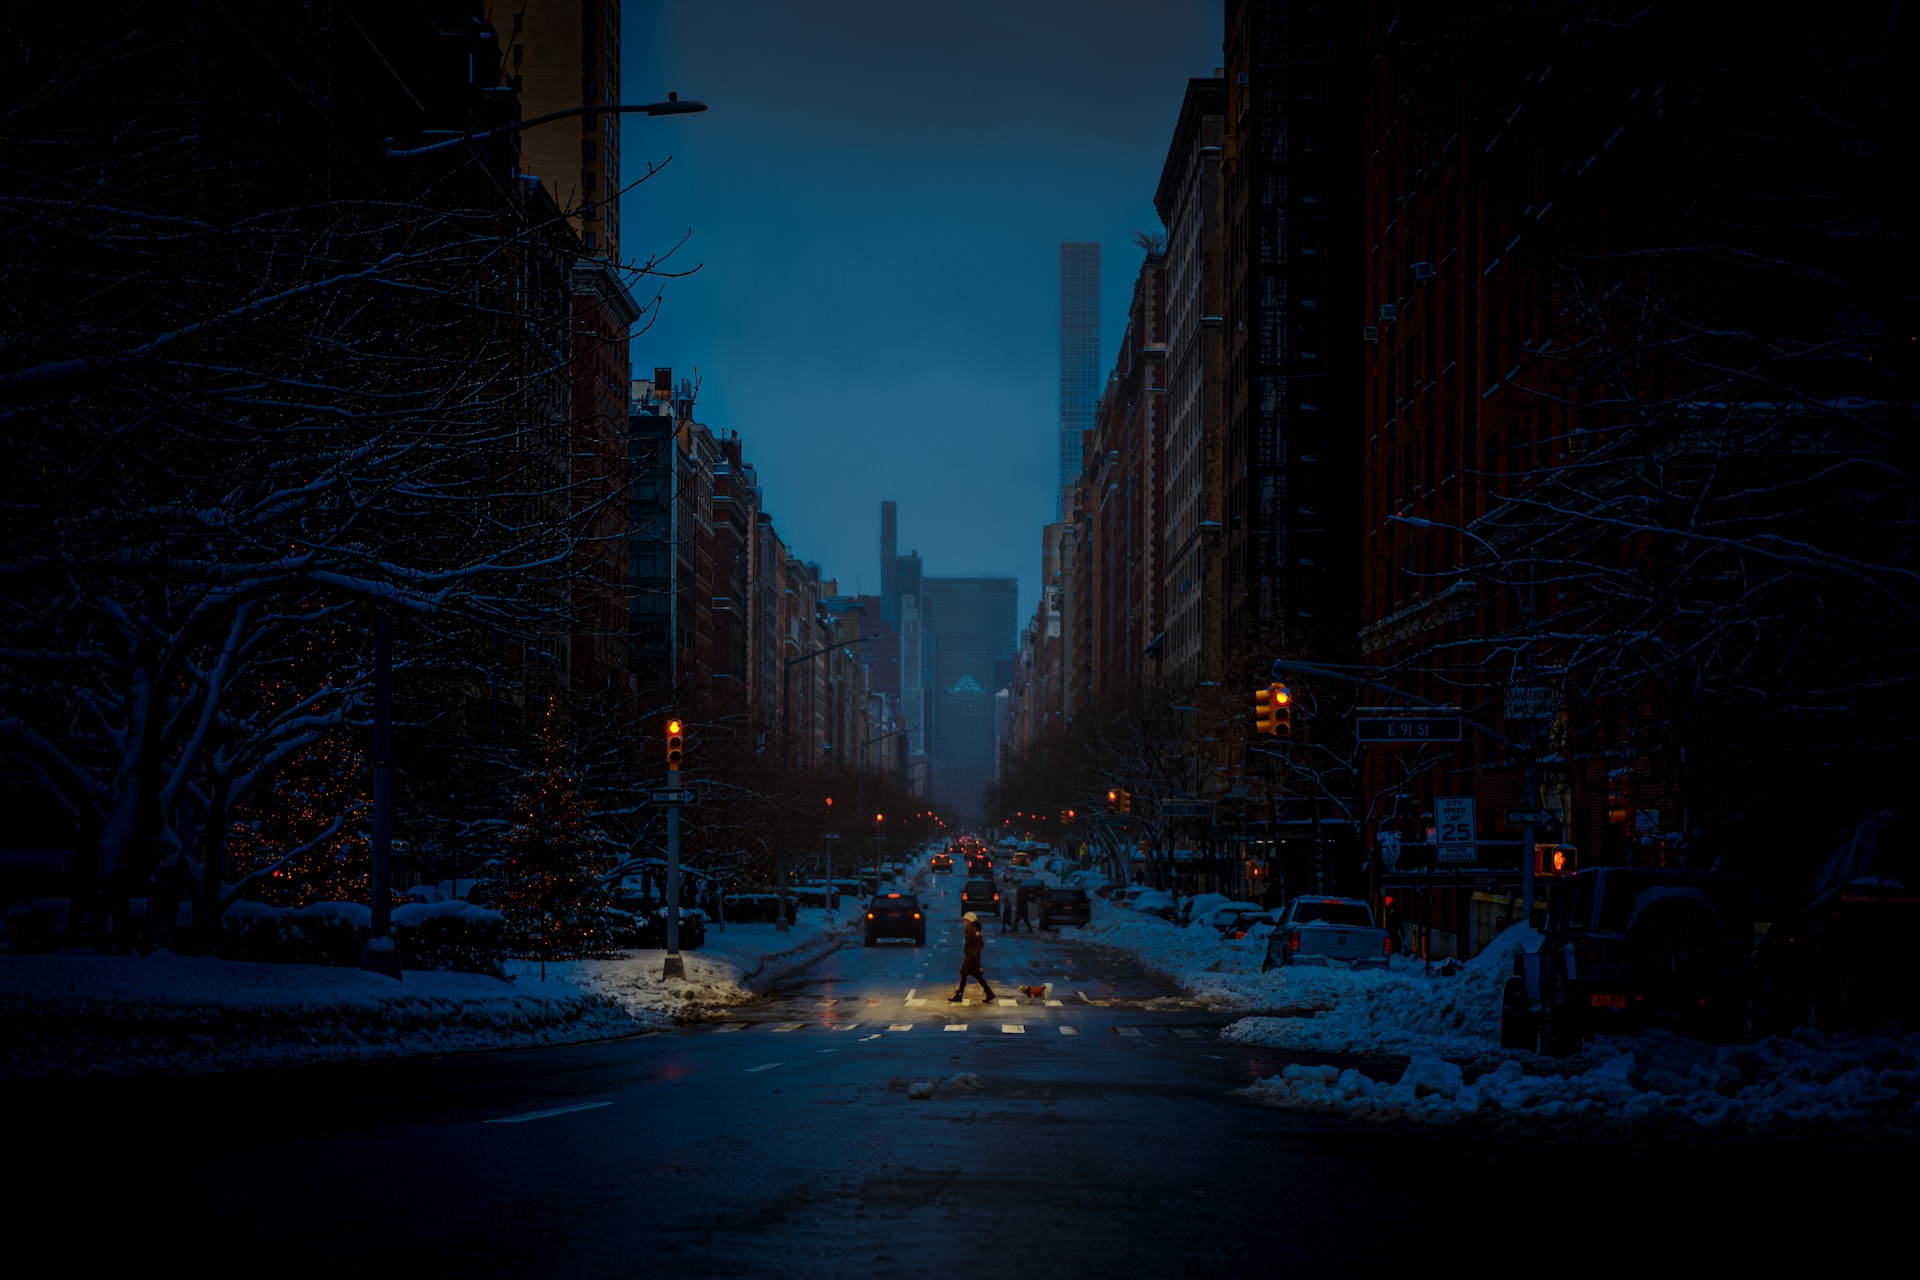 Photograph of a dark street with snow built up on the sides of the road and cars approaching in the background. A single pedestrian is crossing the street, dimly illuminated by a lone streetlight.